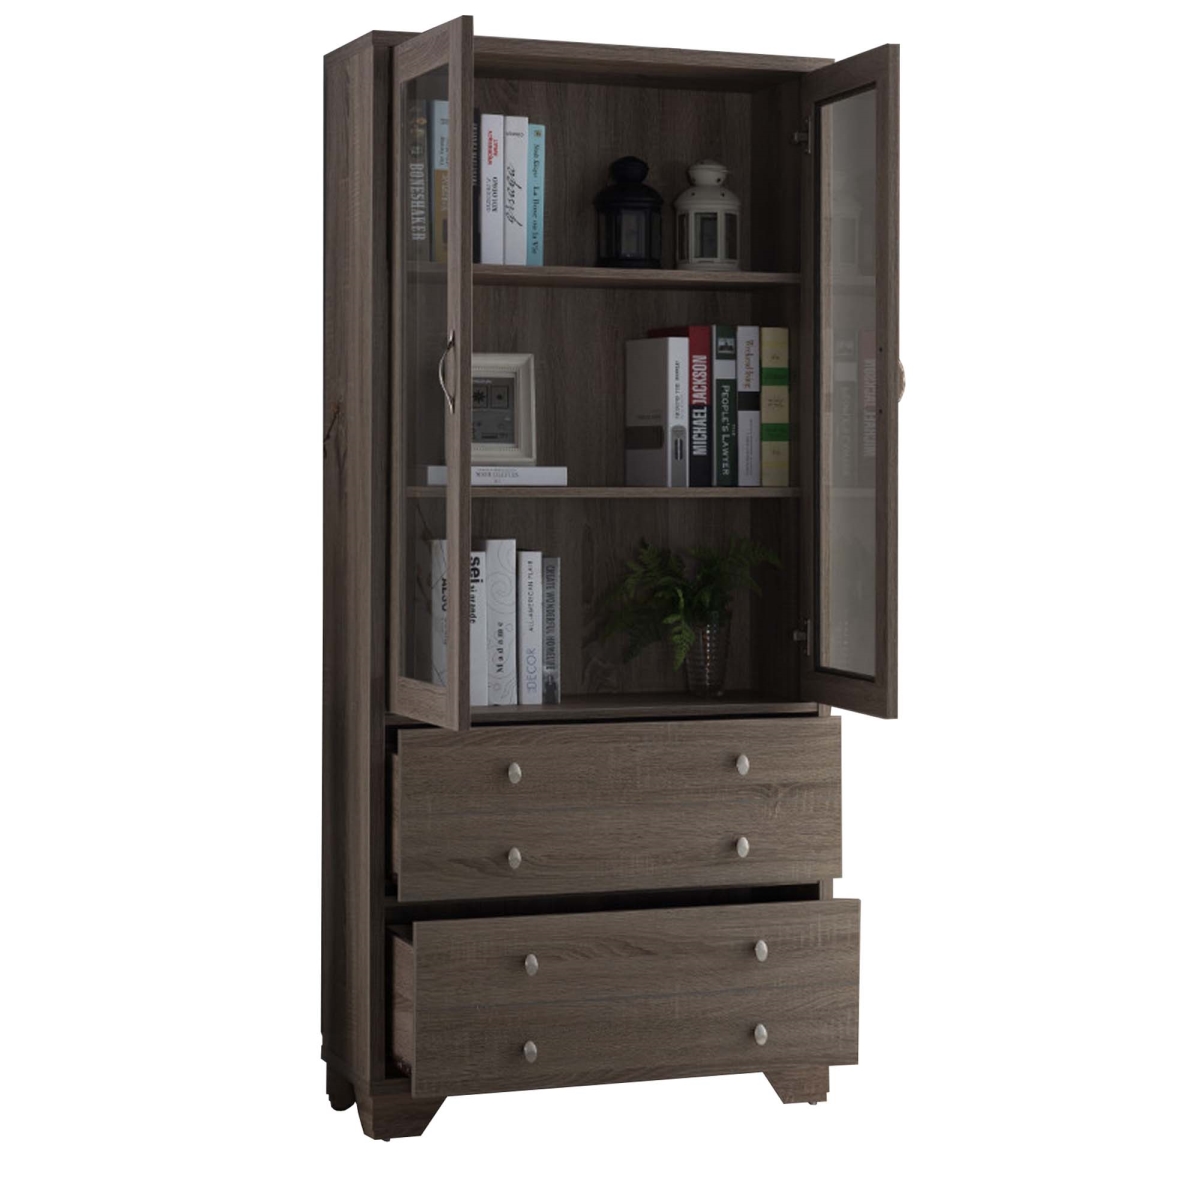 352143 Two Drawers Wooden Book Cabinet With Three Interior Shelves, Taupe Brown